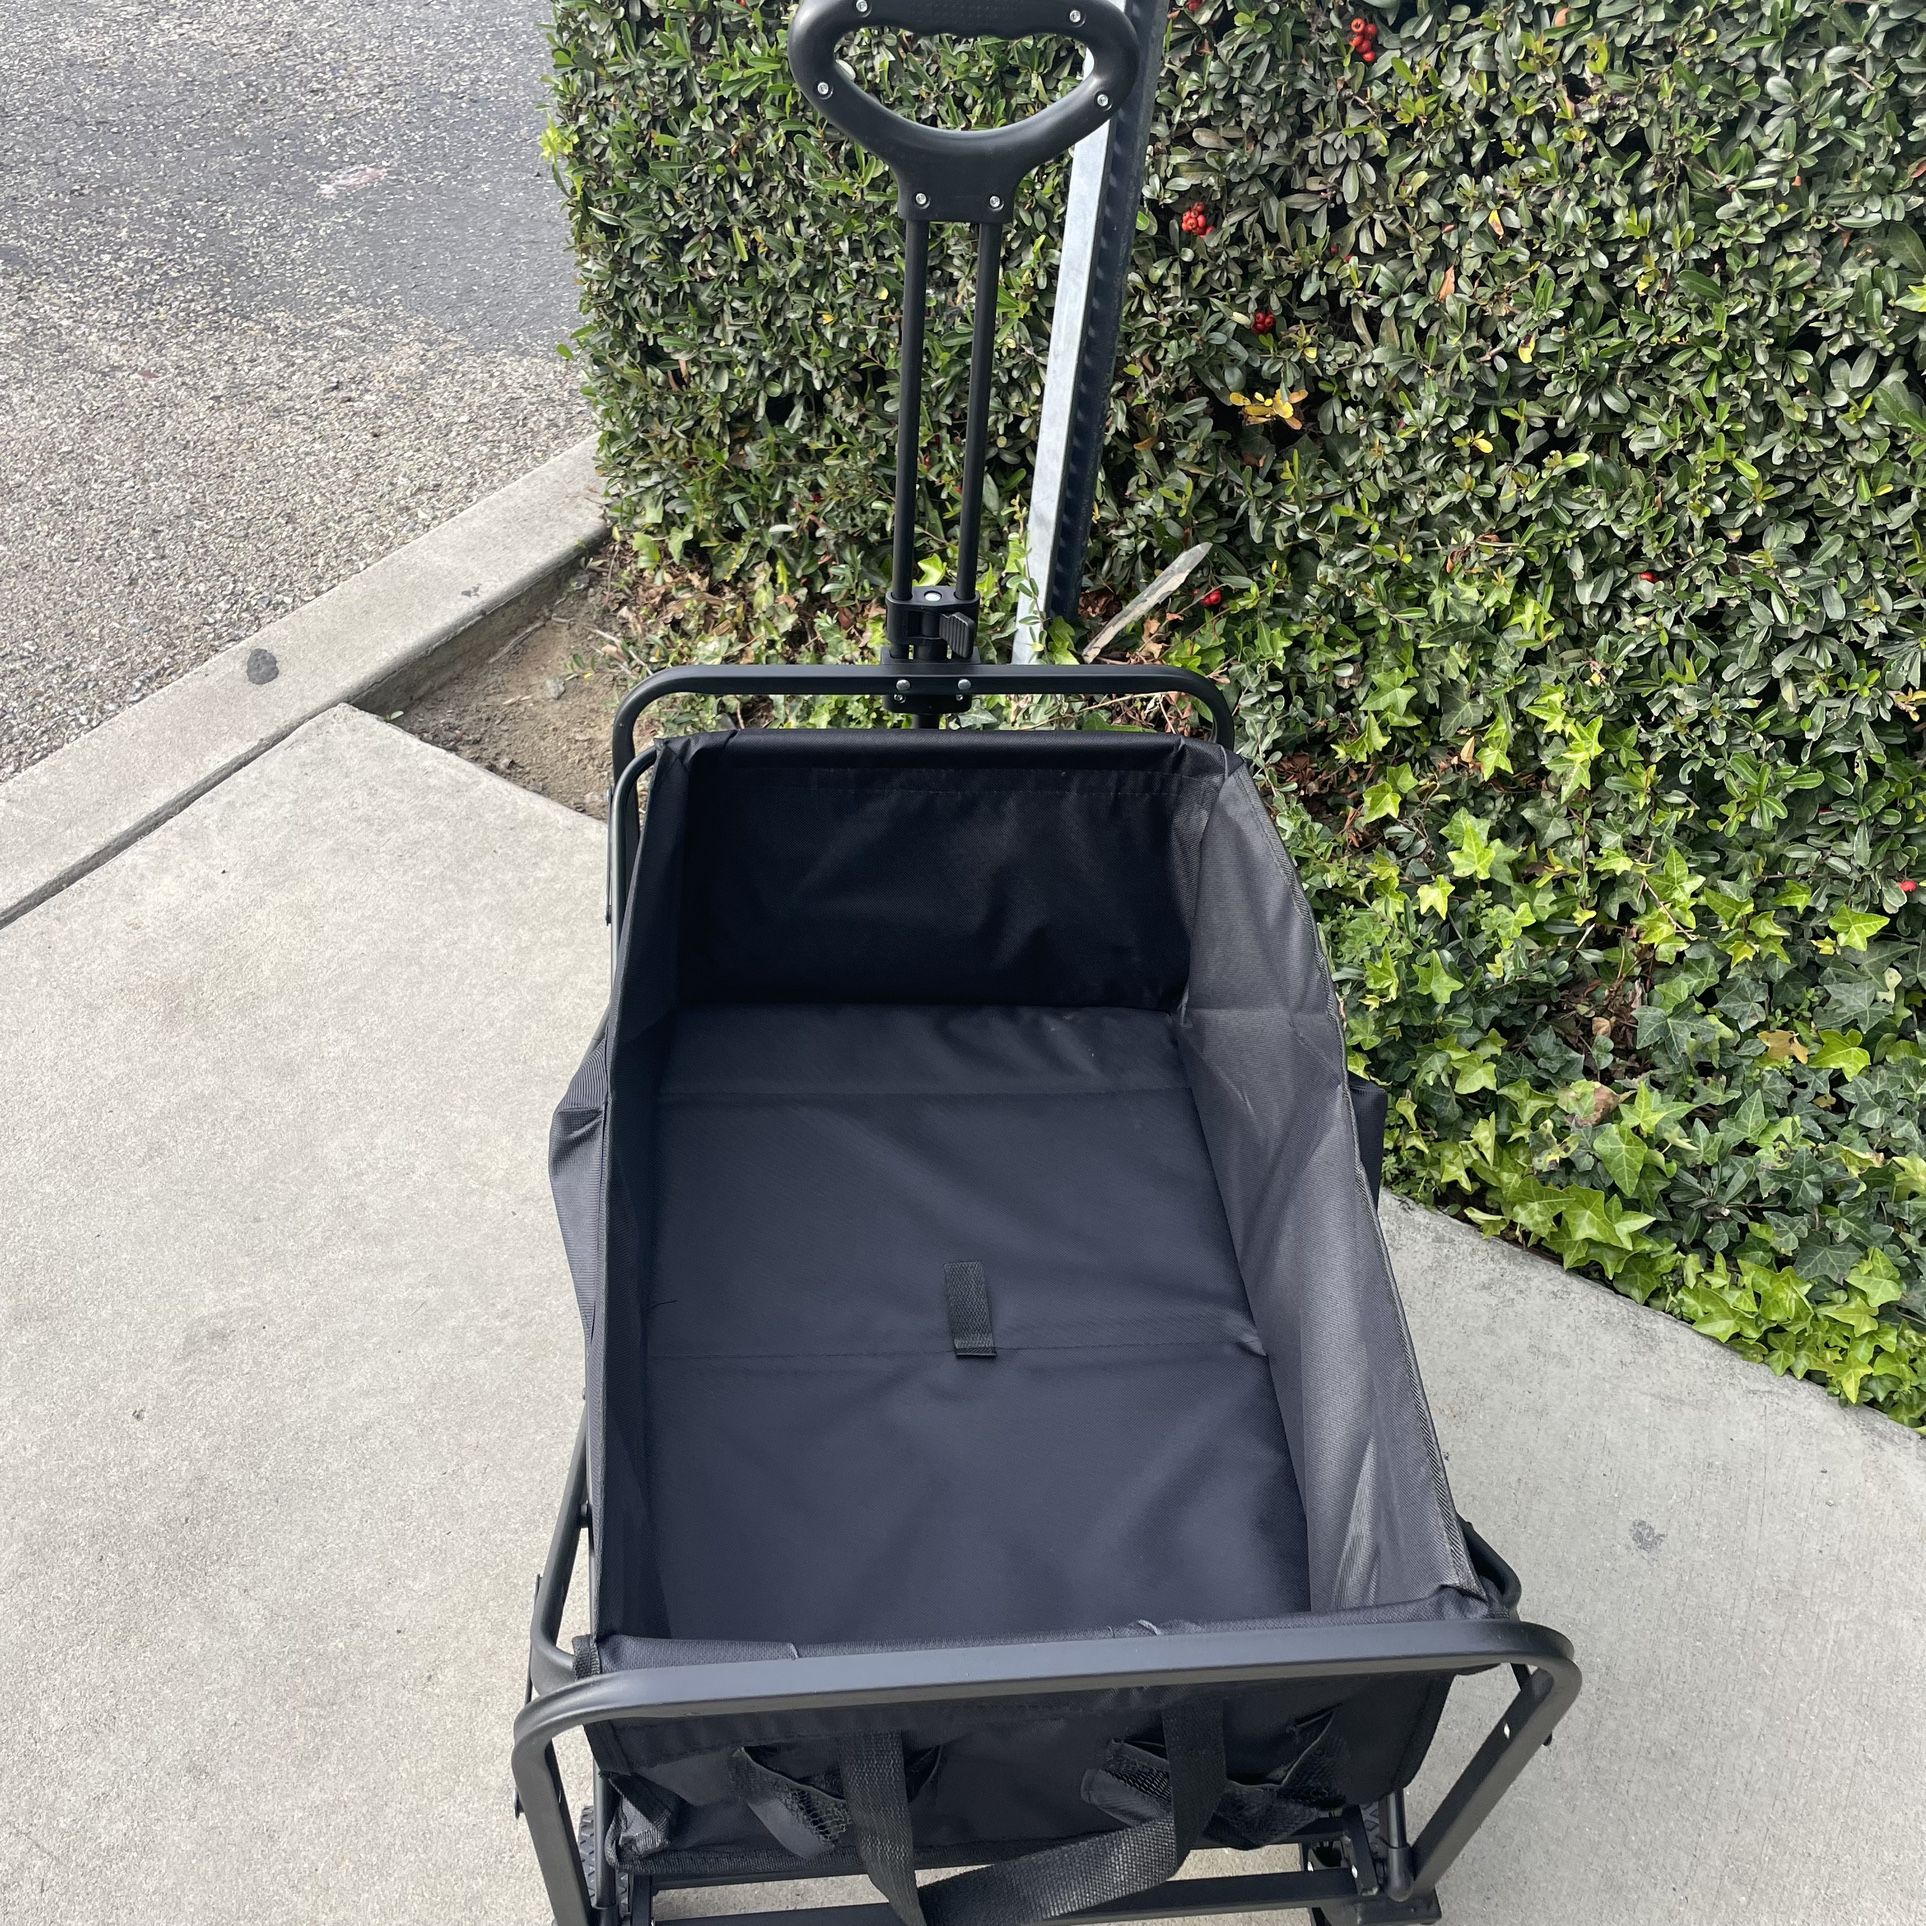 Collapsible Folding Wagon with Adjustable Handle Foldable Utility Wagon Cart with 2 Drink Holders